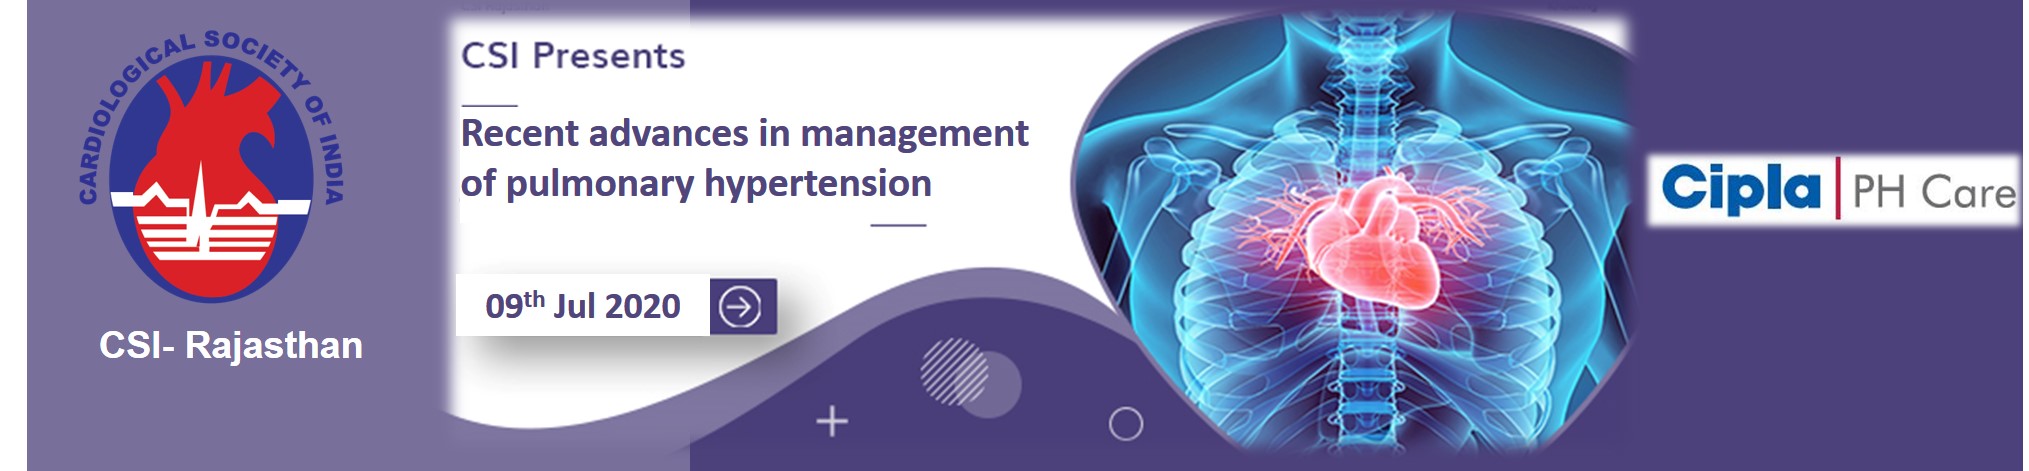 Recent advances in management of Pulmonary Hypertension